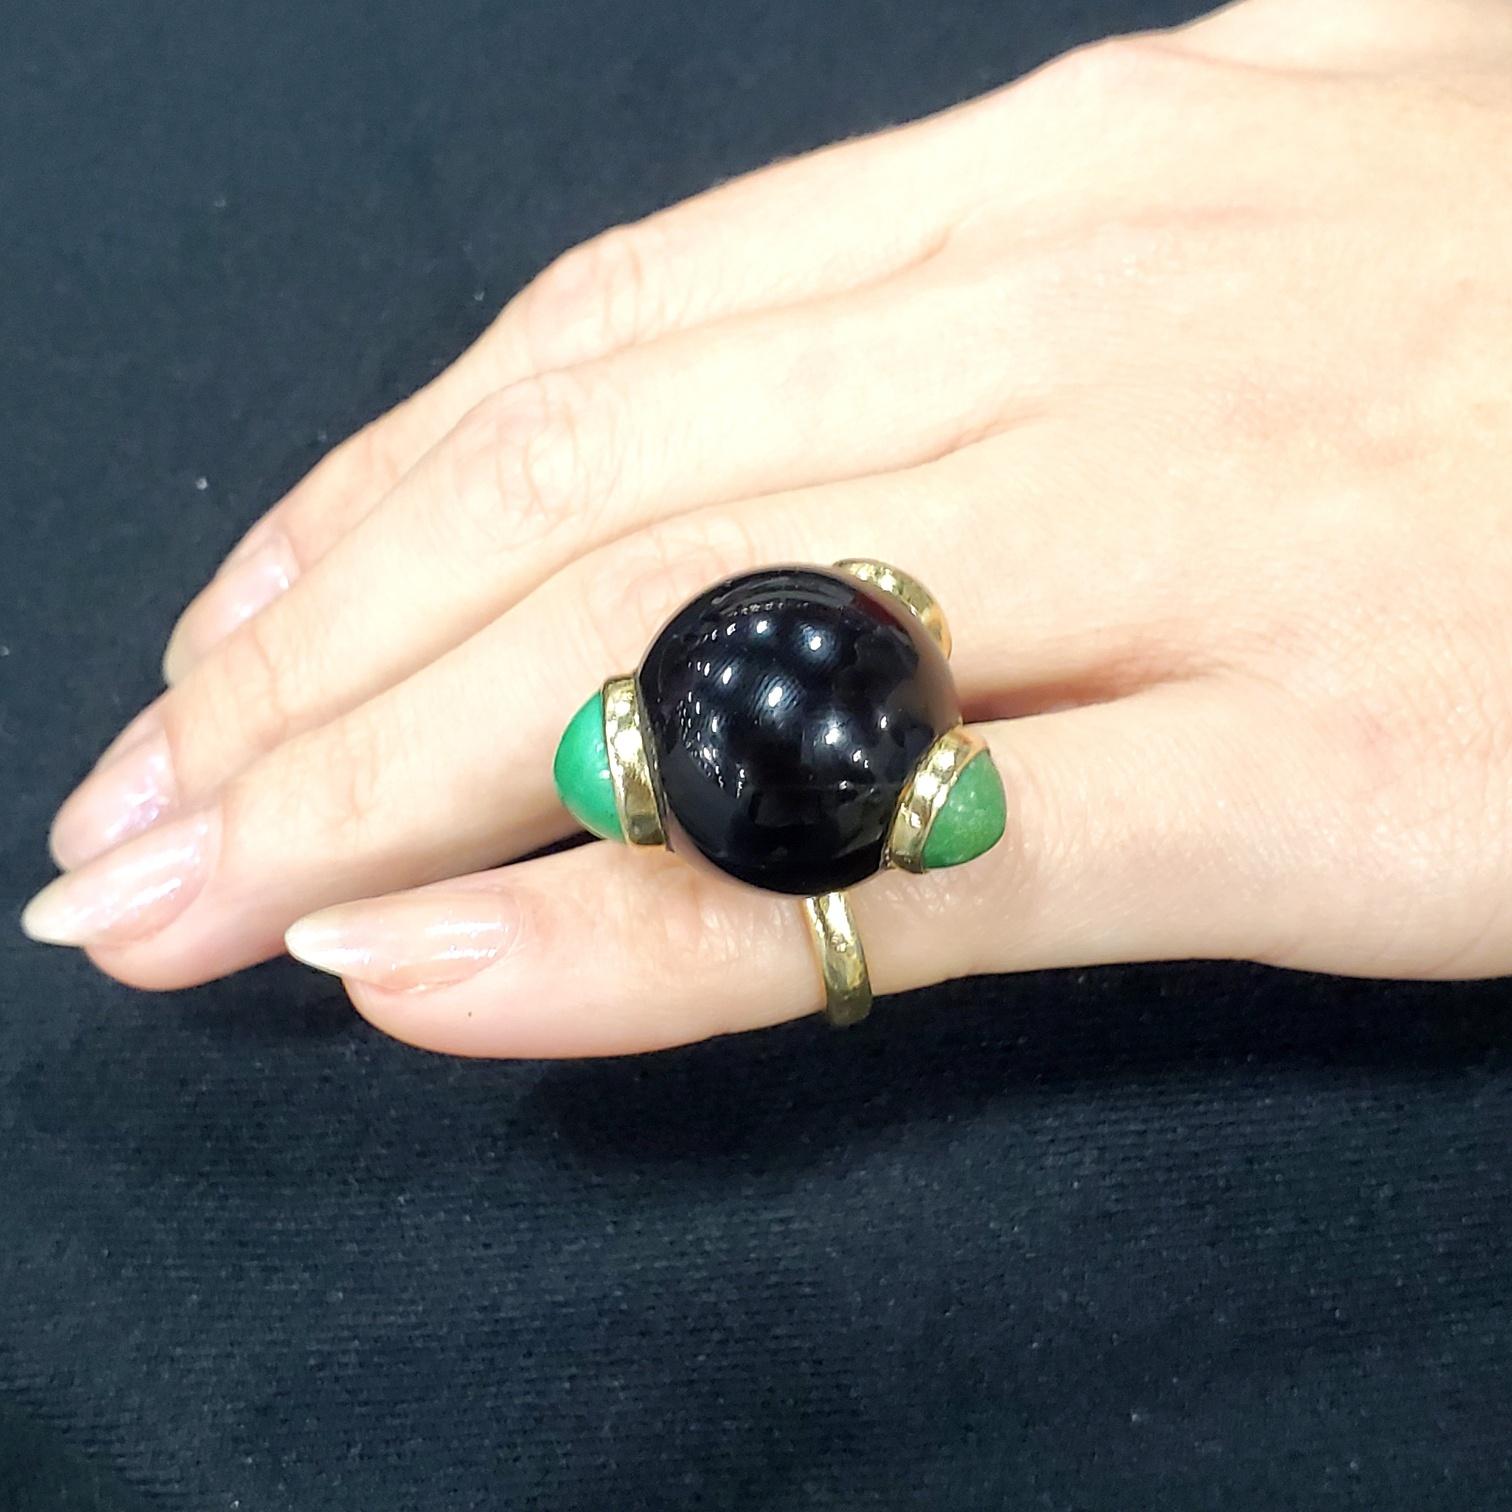 Italian Spatialism 1970 Retro Sculptural Ring 14Kt Gold with Onyx and Turquoise For Sale 1